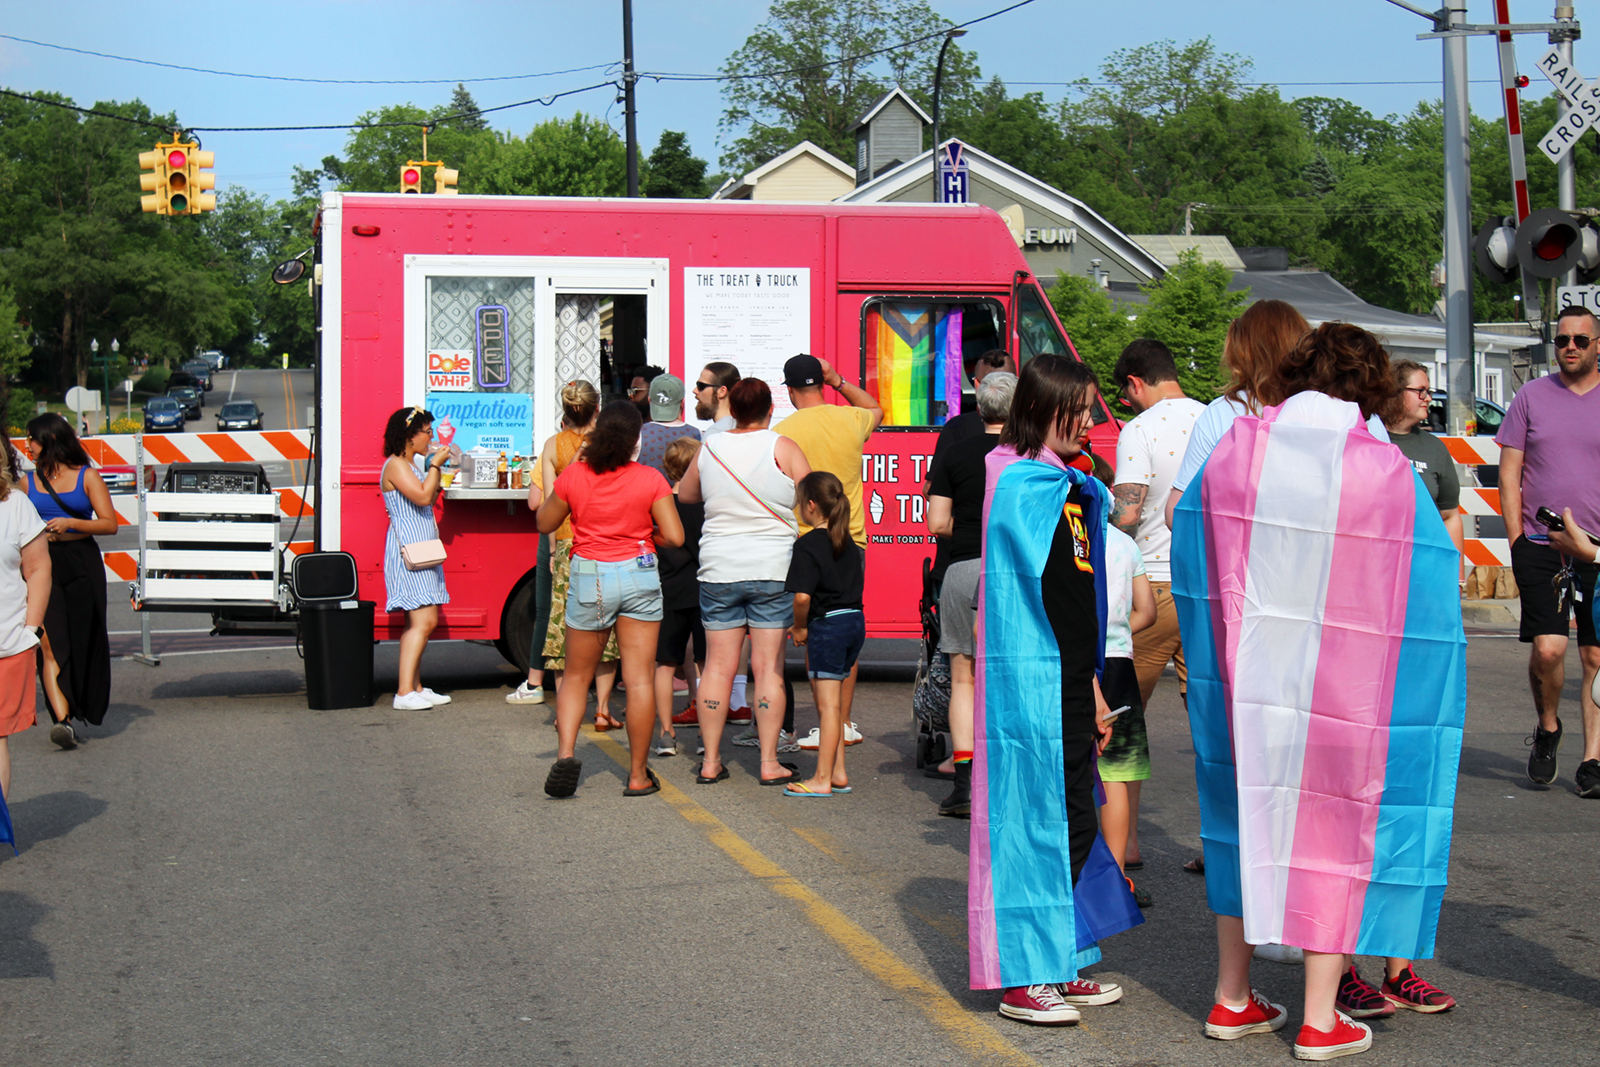 Pride attendees line up at The Treat Truck to beat the heat. The truck offered vegan soft-serve and cool beverages throughout the festival.